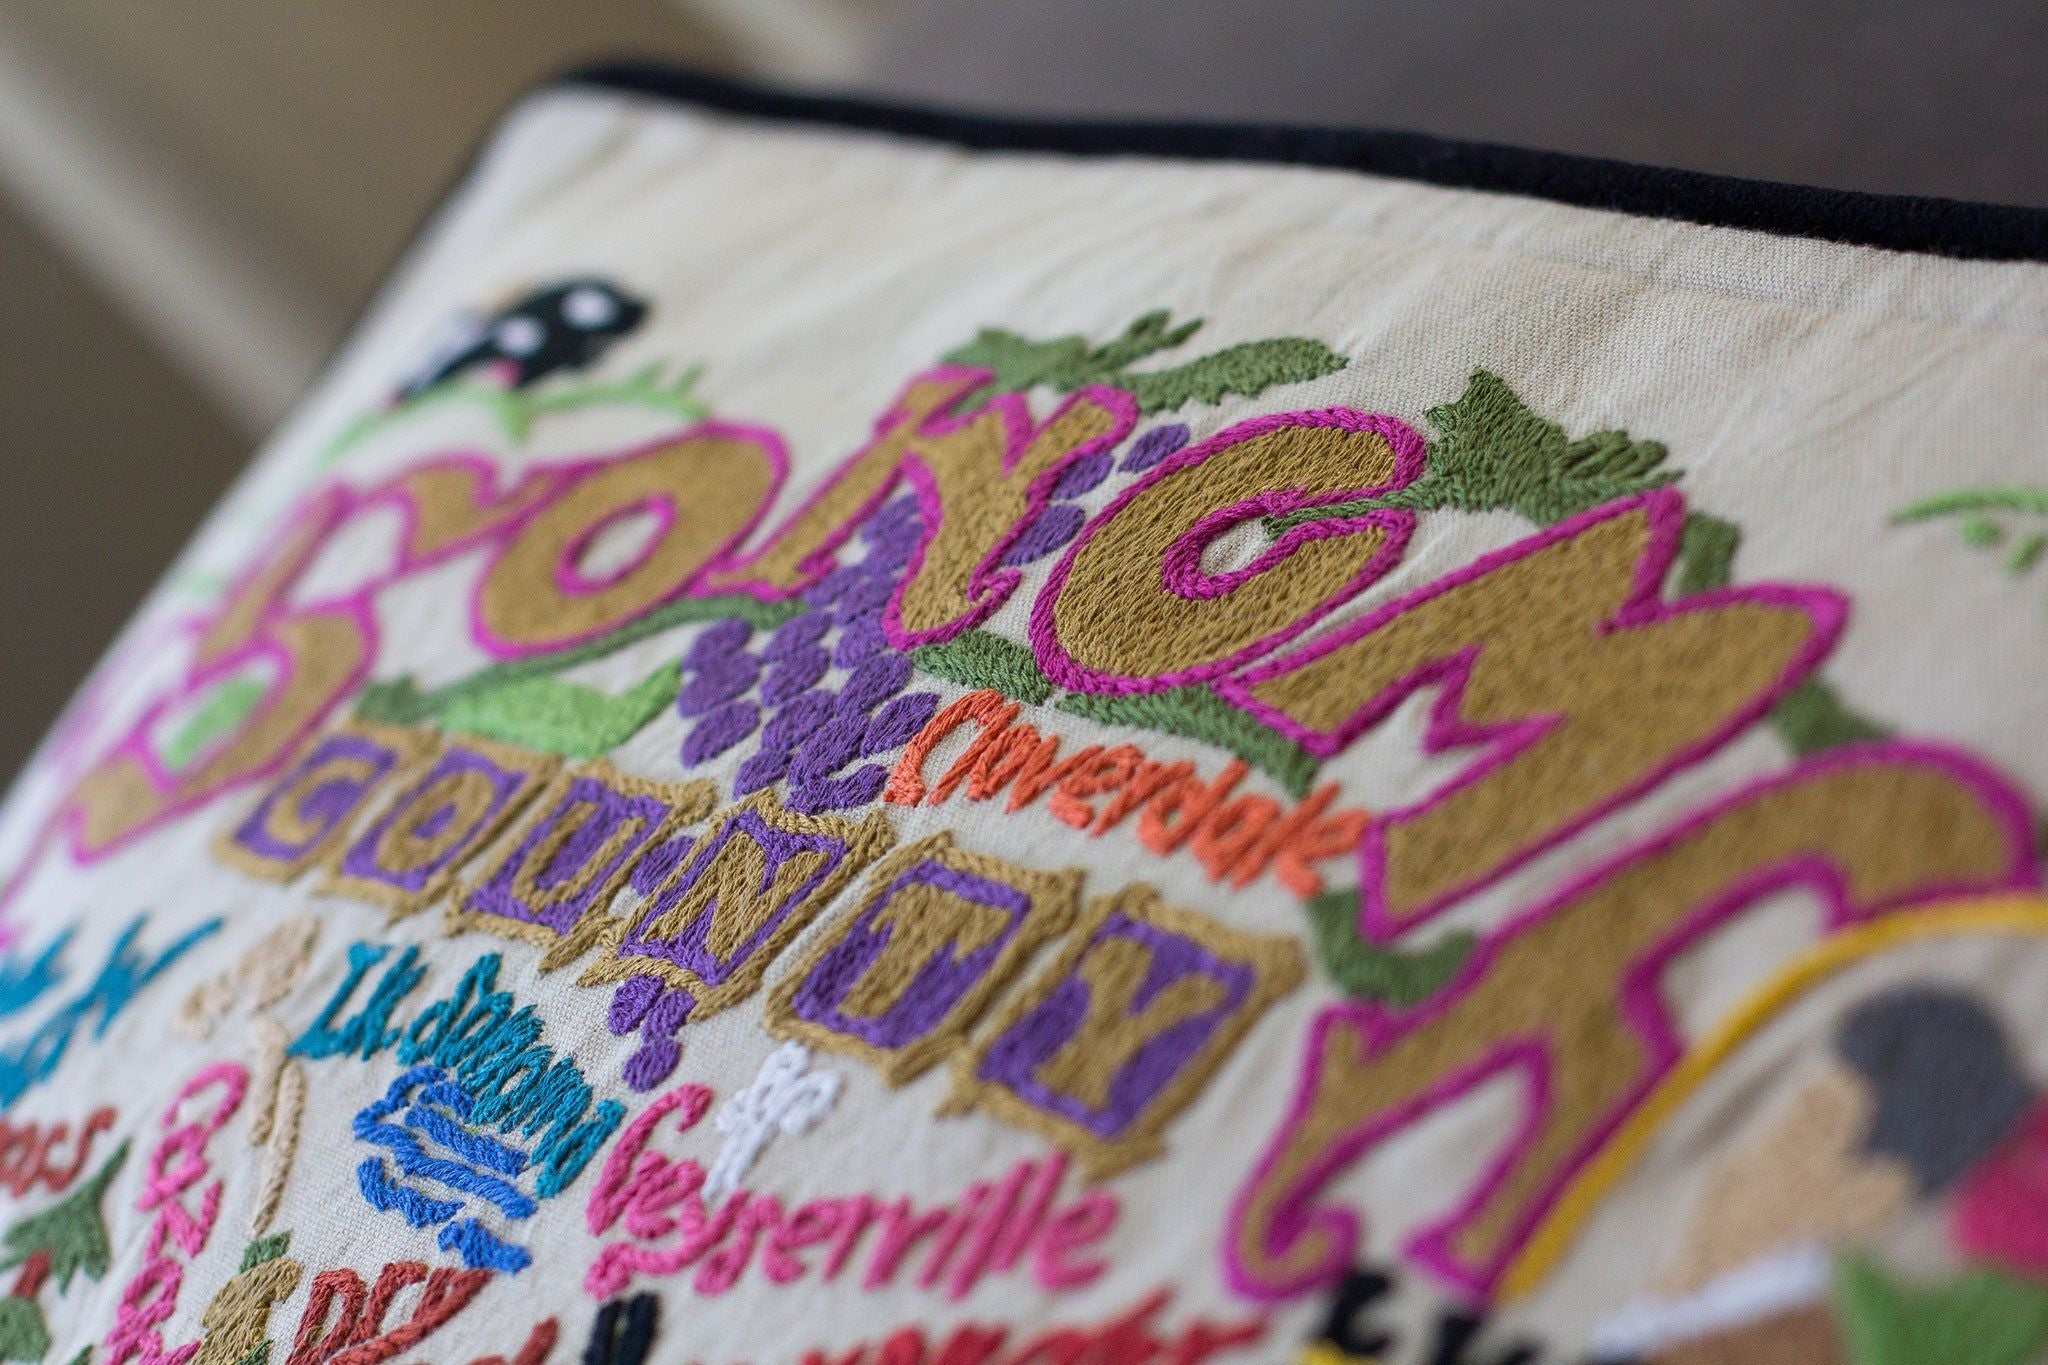 Sonoma County Hand-Embroidered Pillow